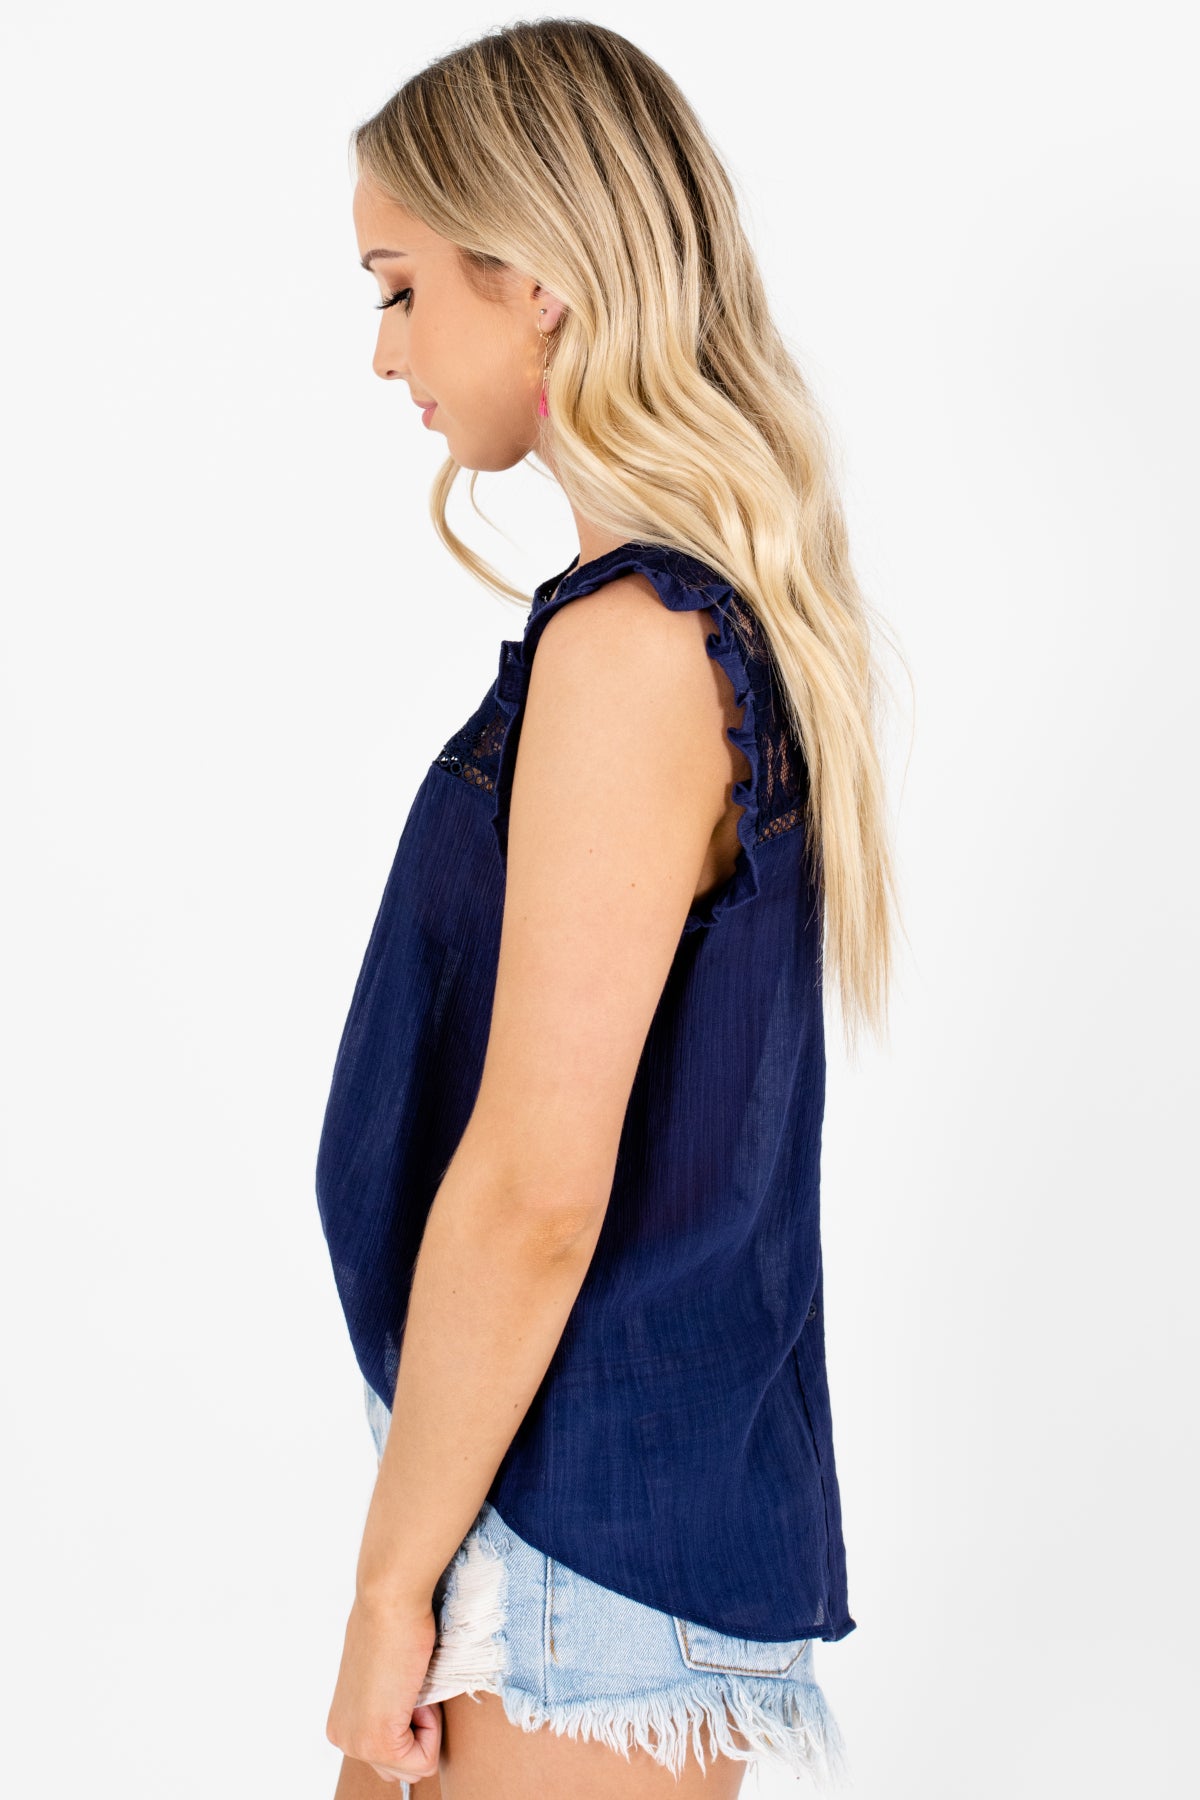 Navy Blue Ruffle Lace Tops Affordable Online Boutique